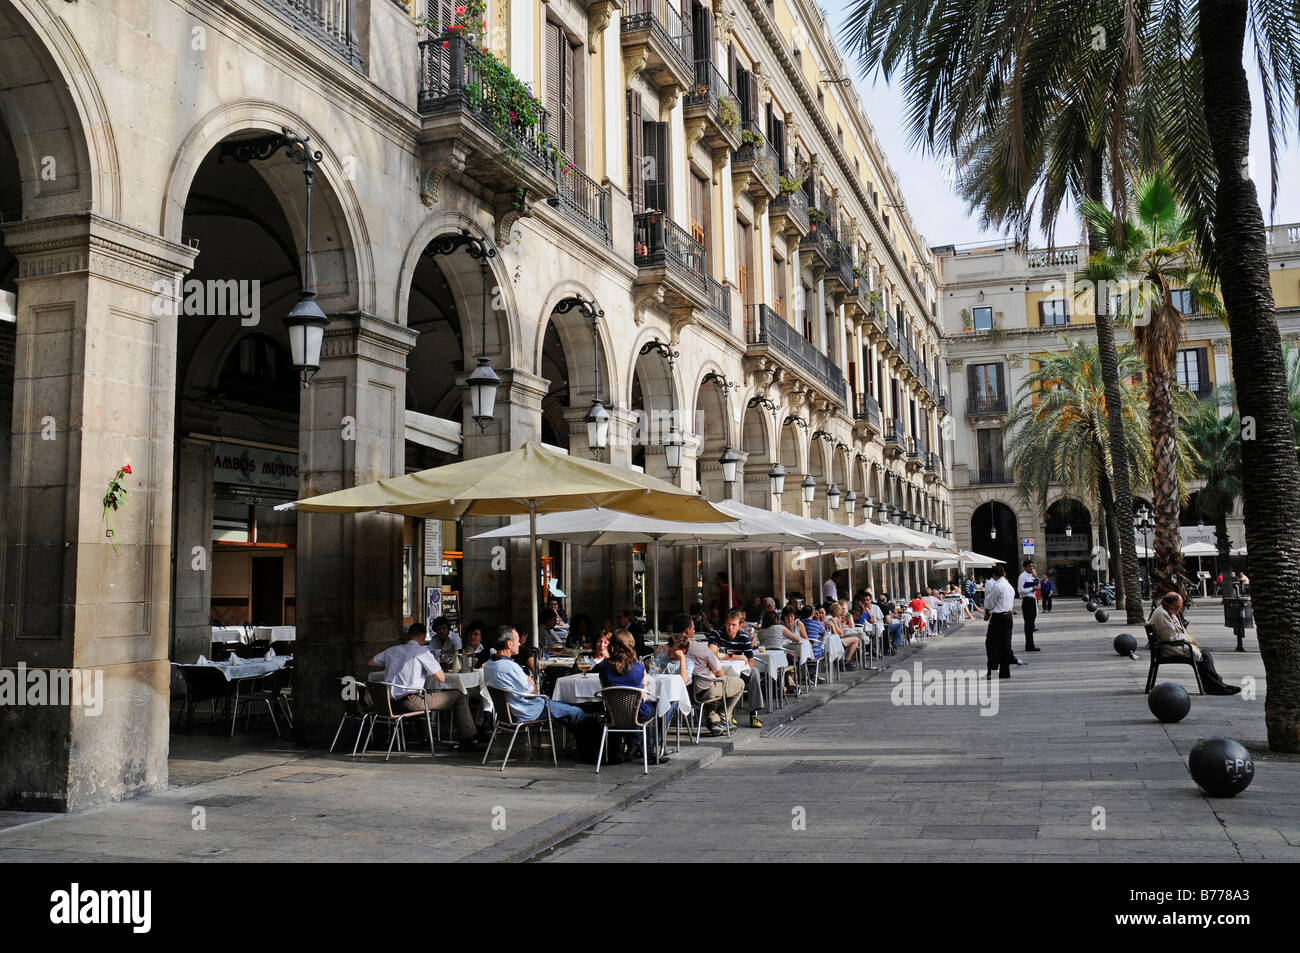 Restaurant, outdoor cafe, people, palm trees, Placa Reial Square, Barcelona, Catalonia, Spain, Europe Stock Photo